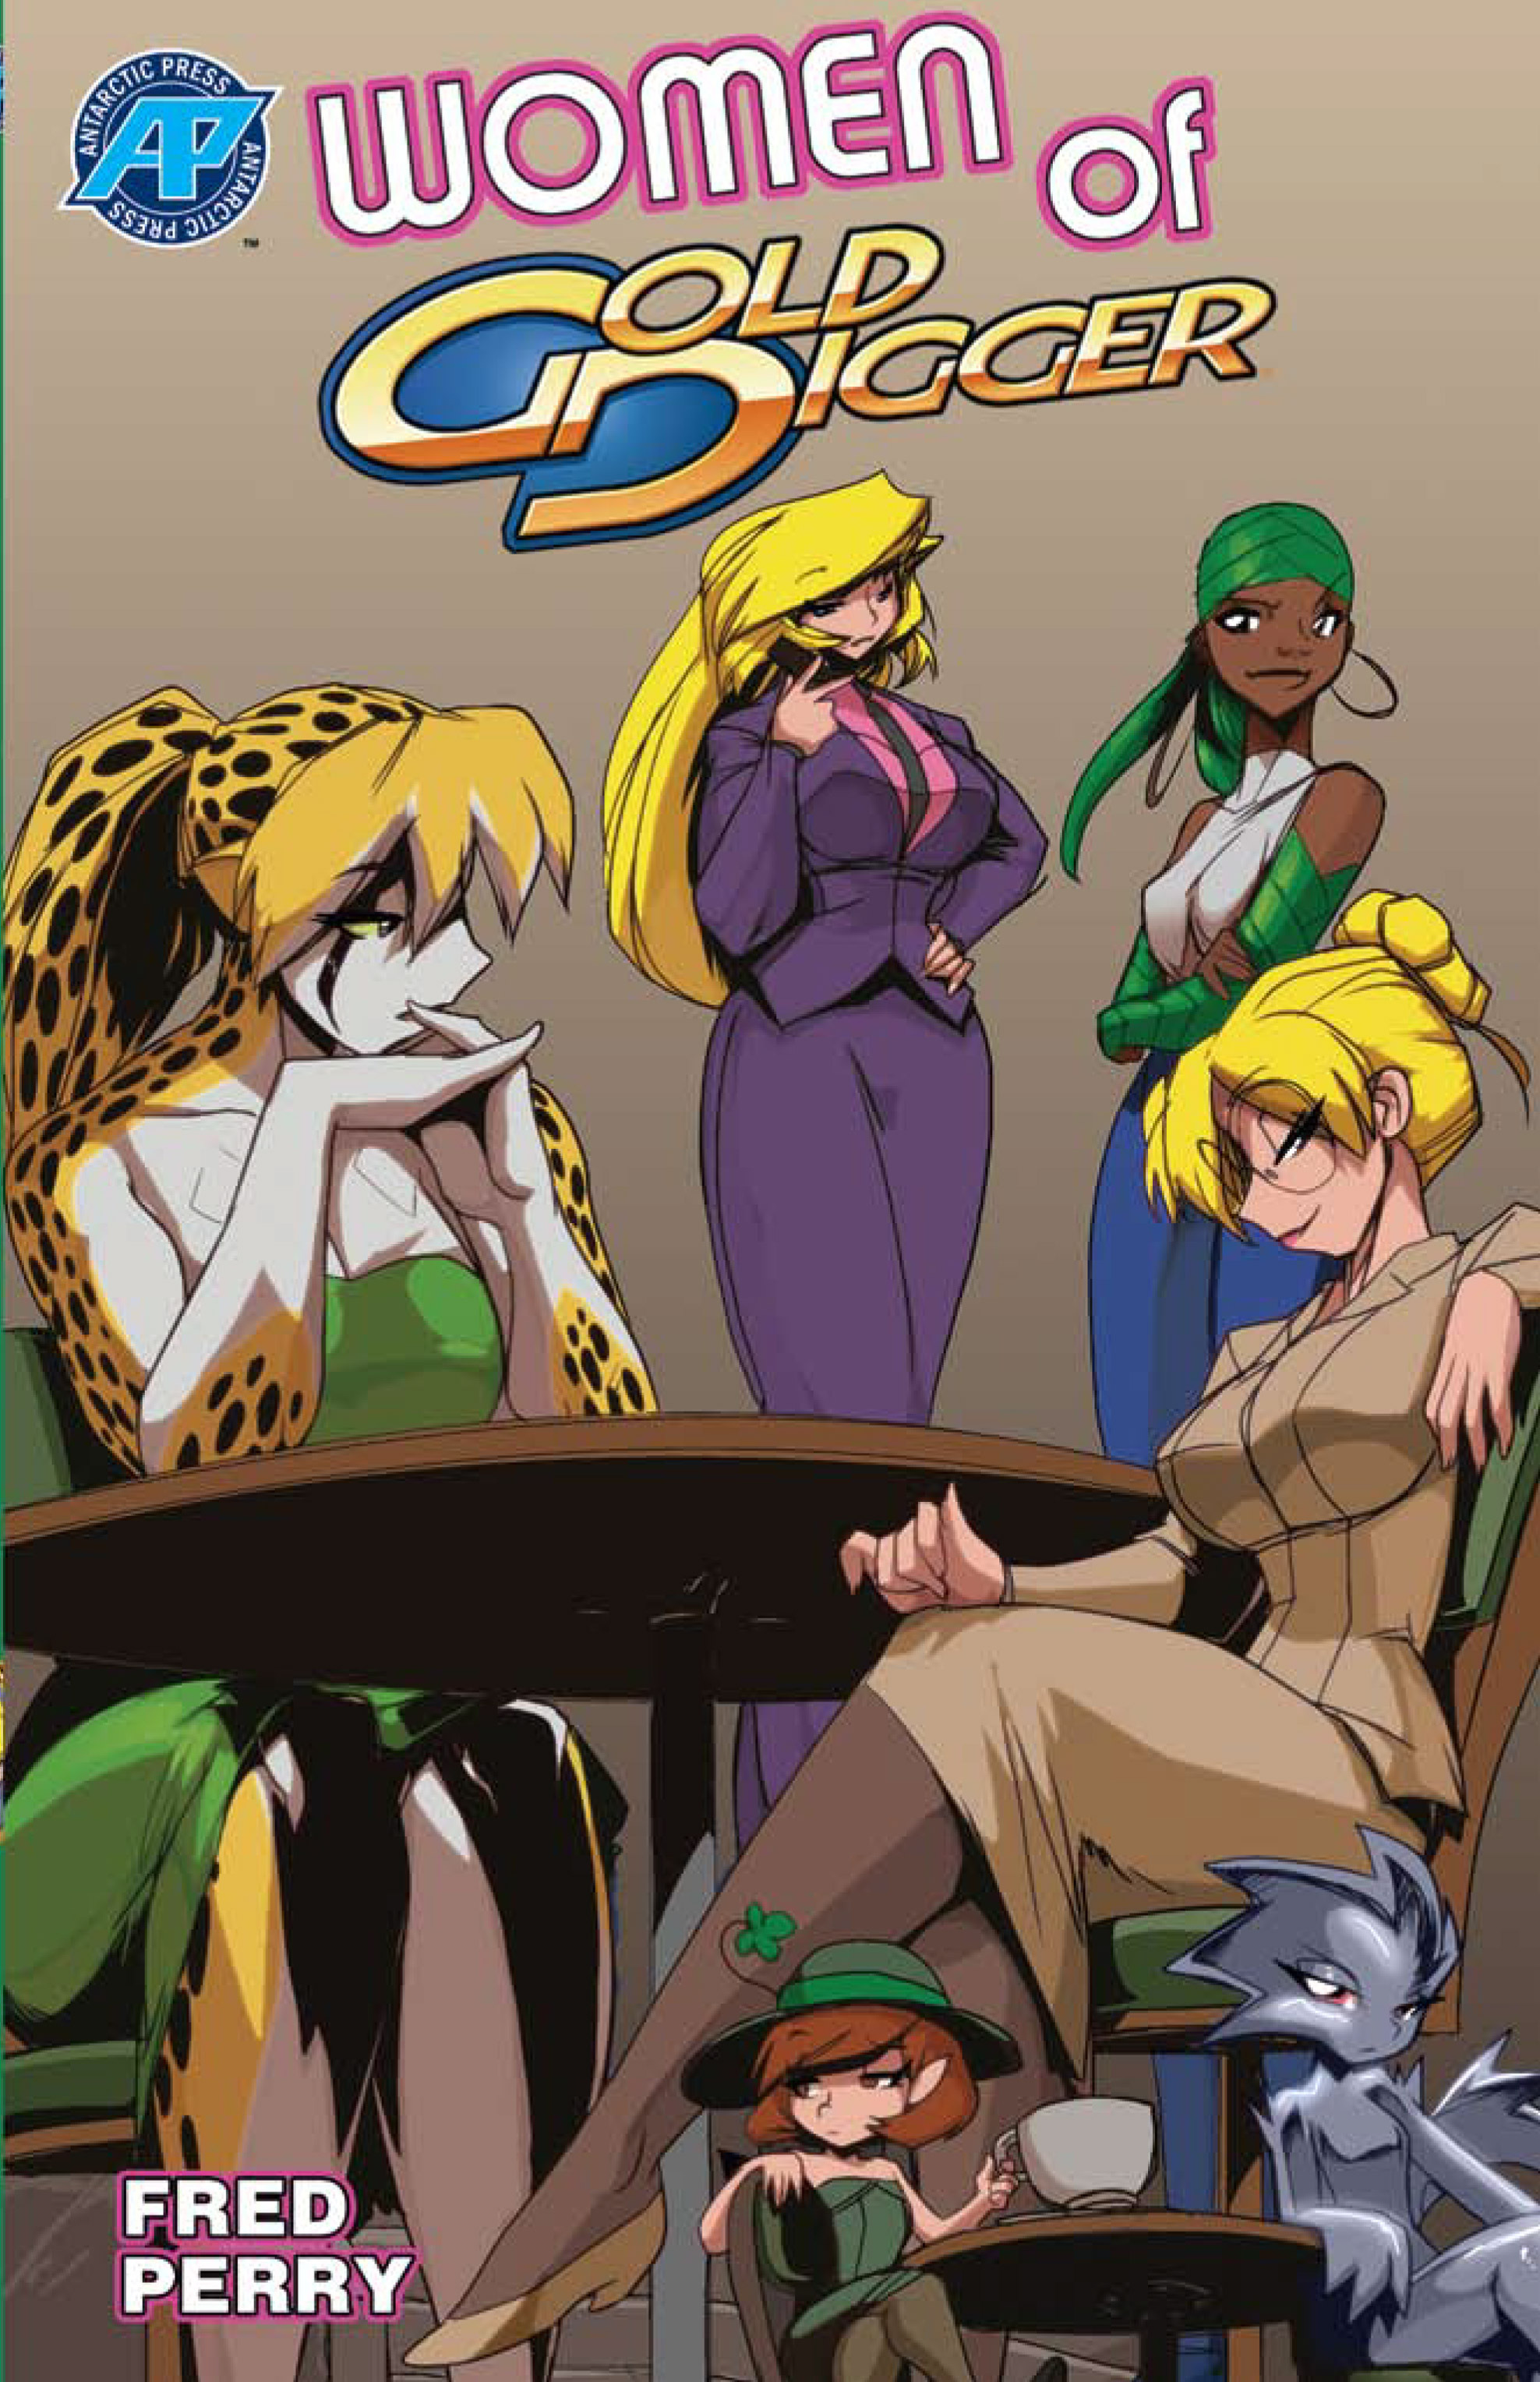 Read online Women of Gold Digger comic -  Issue # TPB - 1